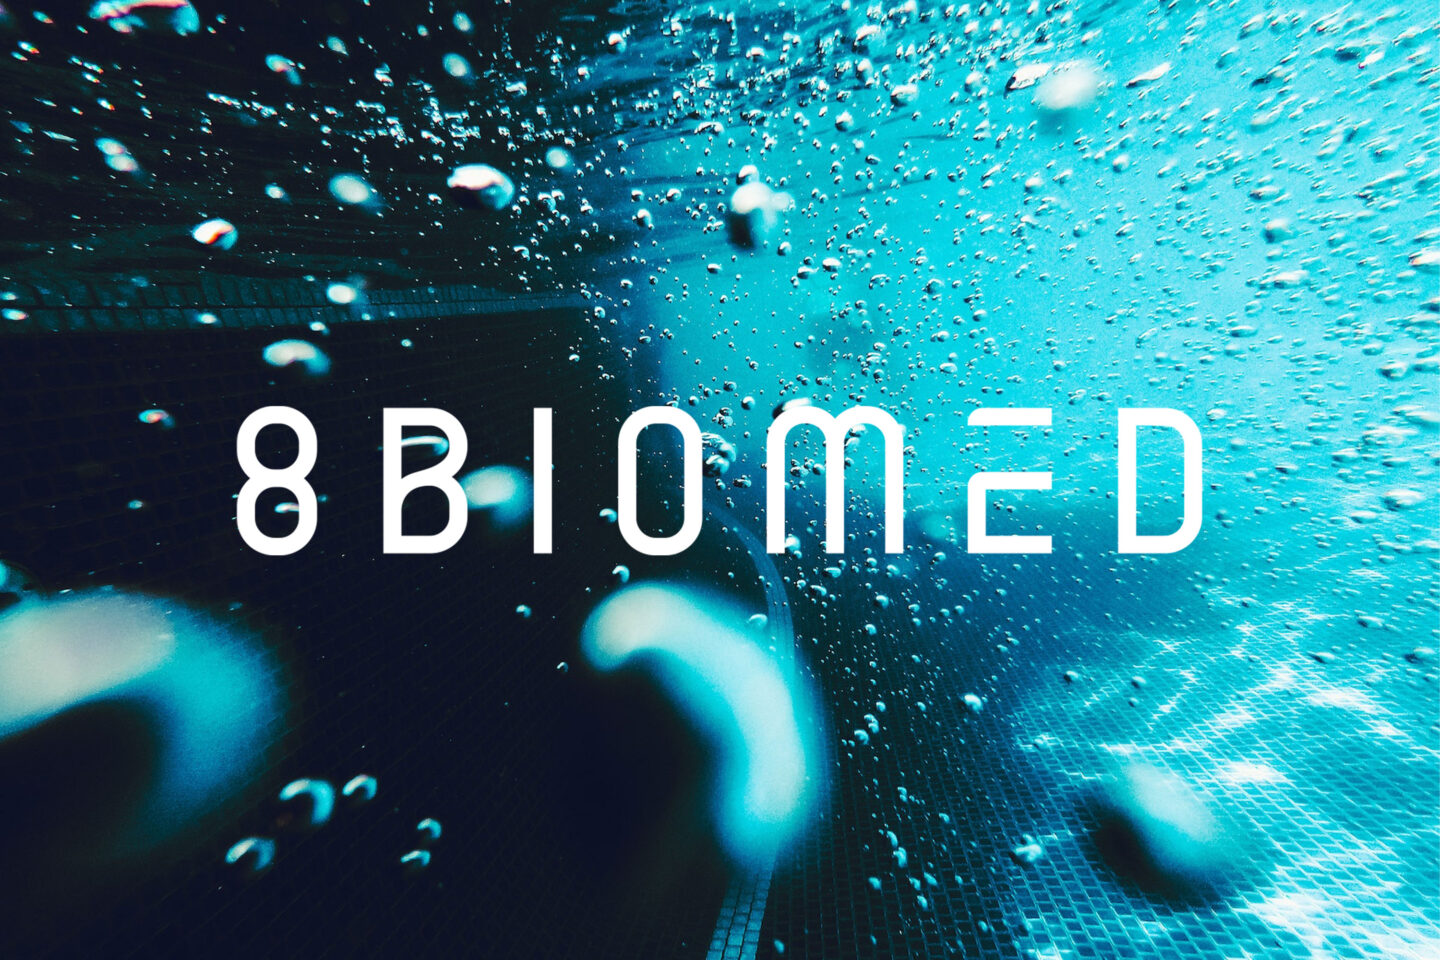 The title 8 Biomed on blue background